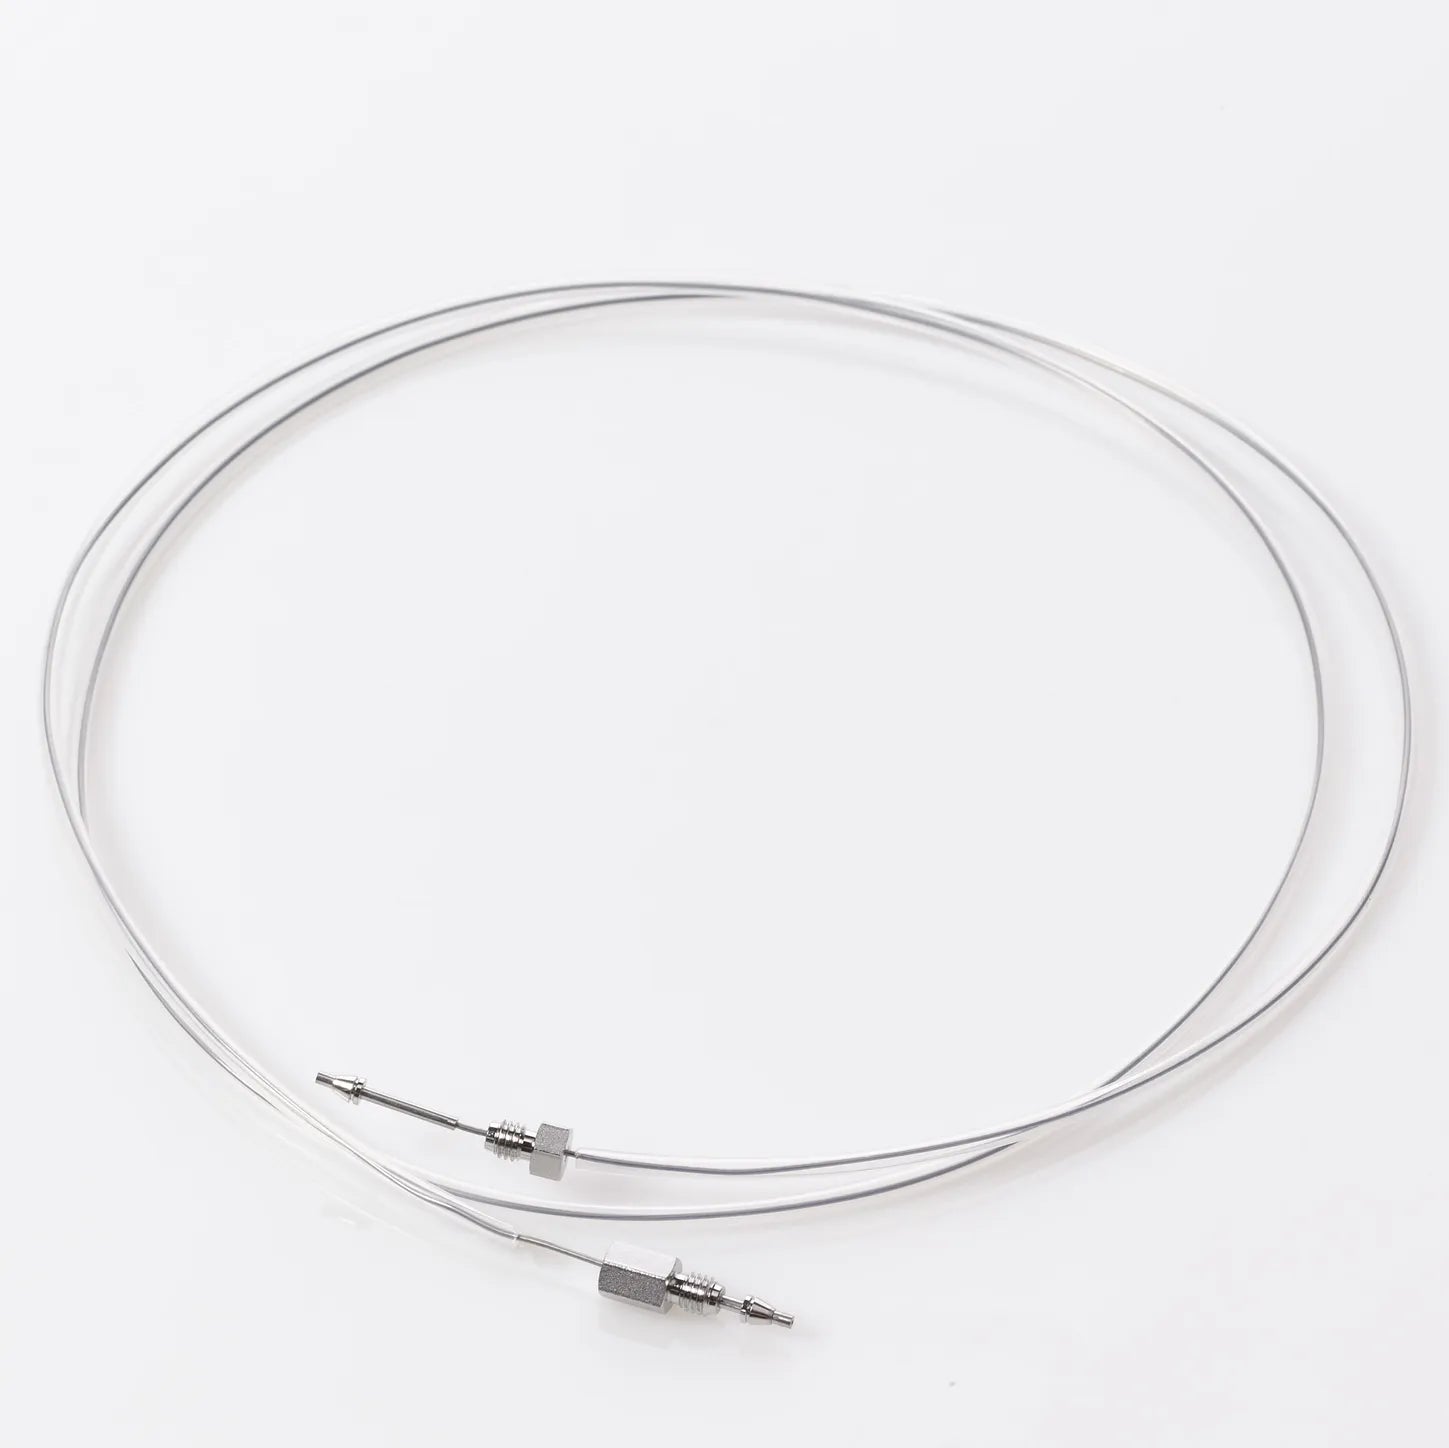 Capillary, Loop, 100µL, Comparable to Agilent # 01078-87302